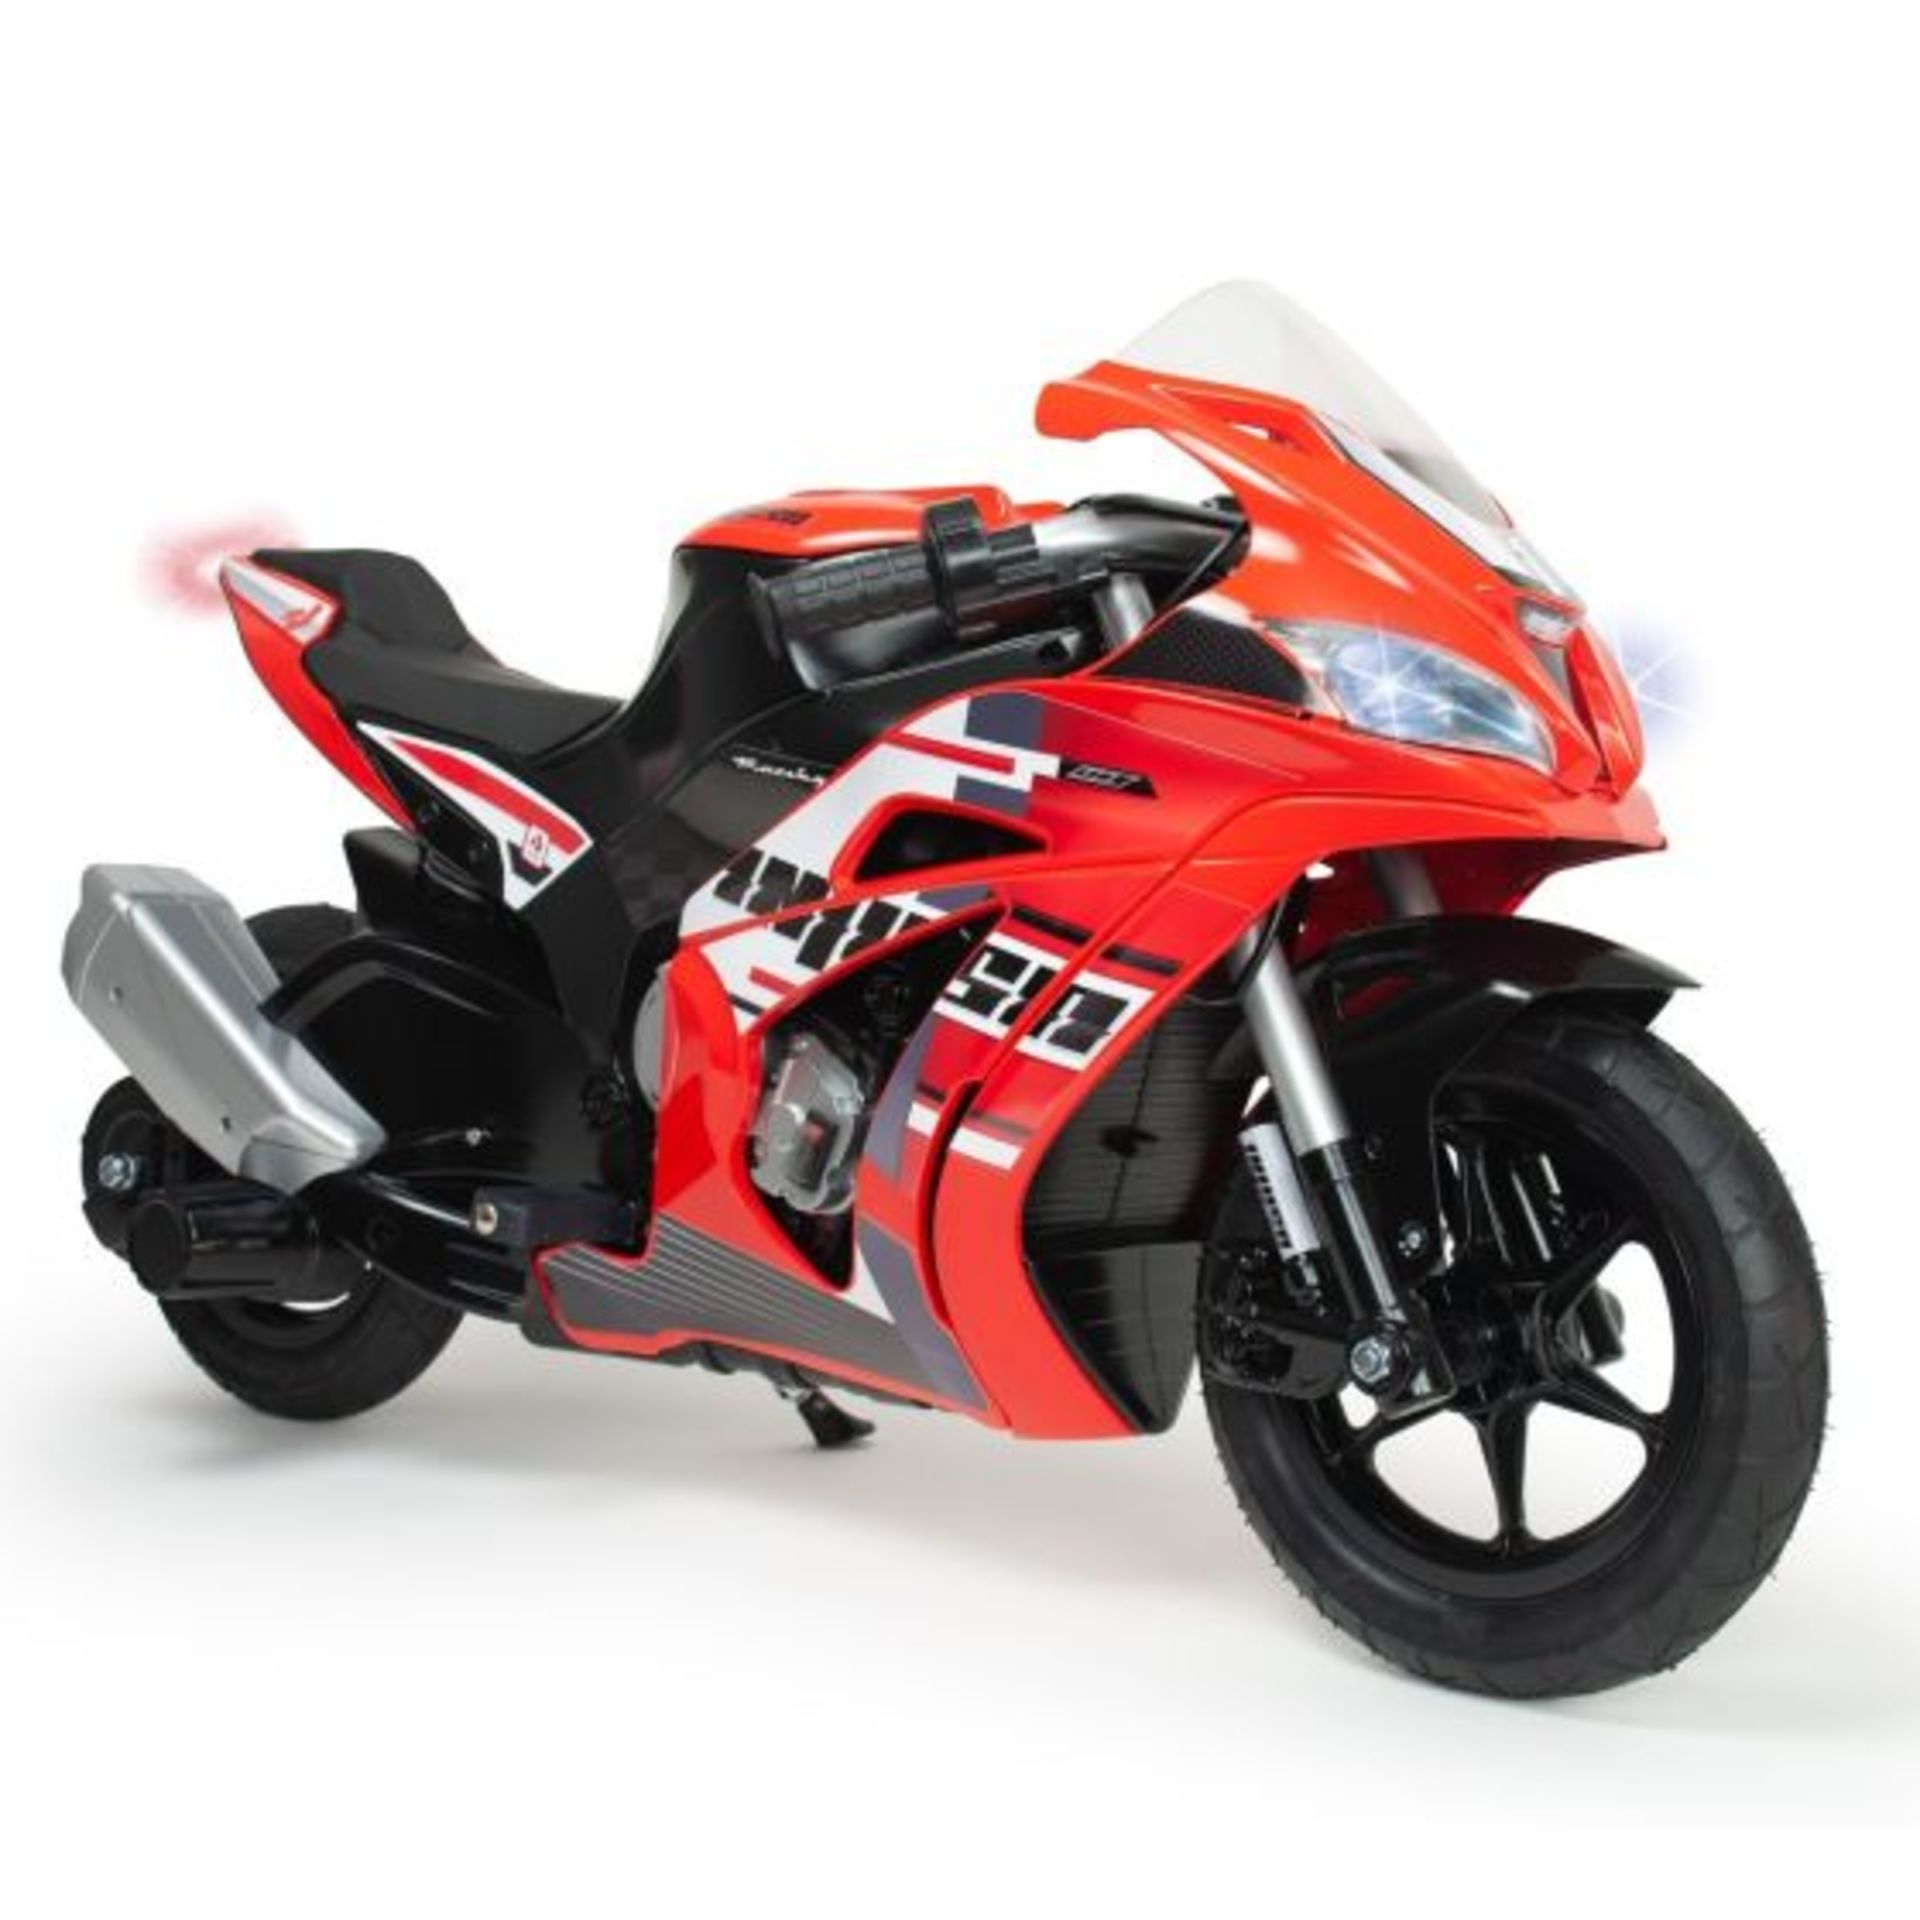 BRAND NEW INJUSA MOTORBIKE RACING FIGHTER, Are you ready to head down to the track? The Injusa